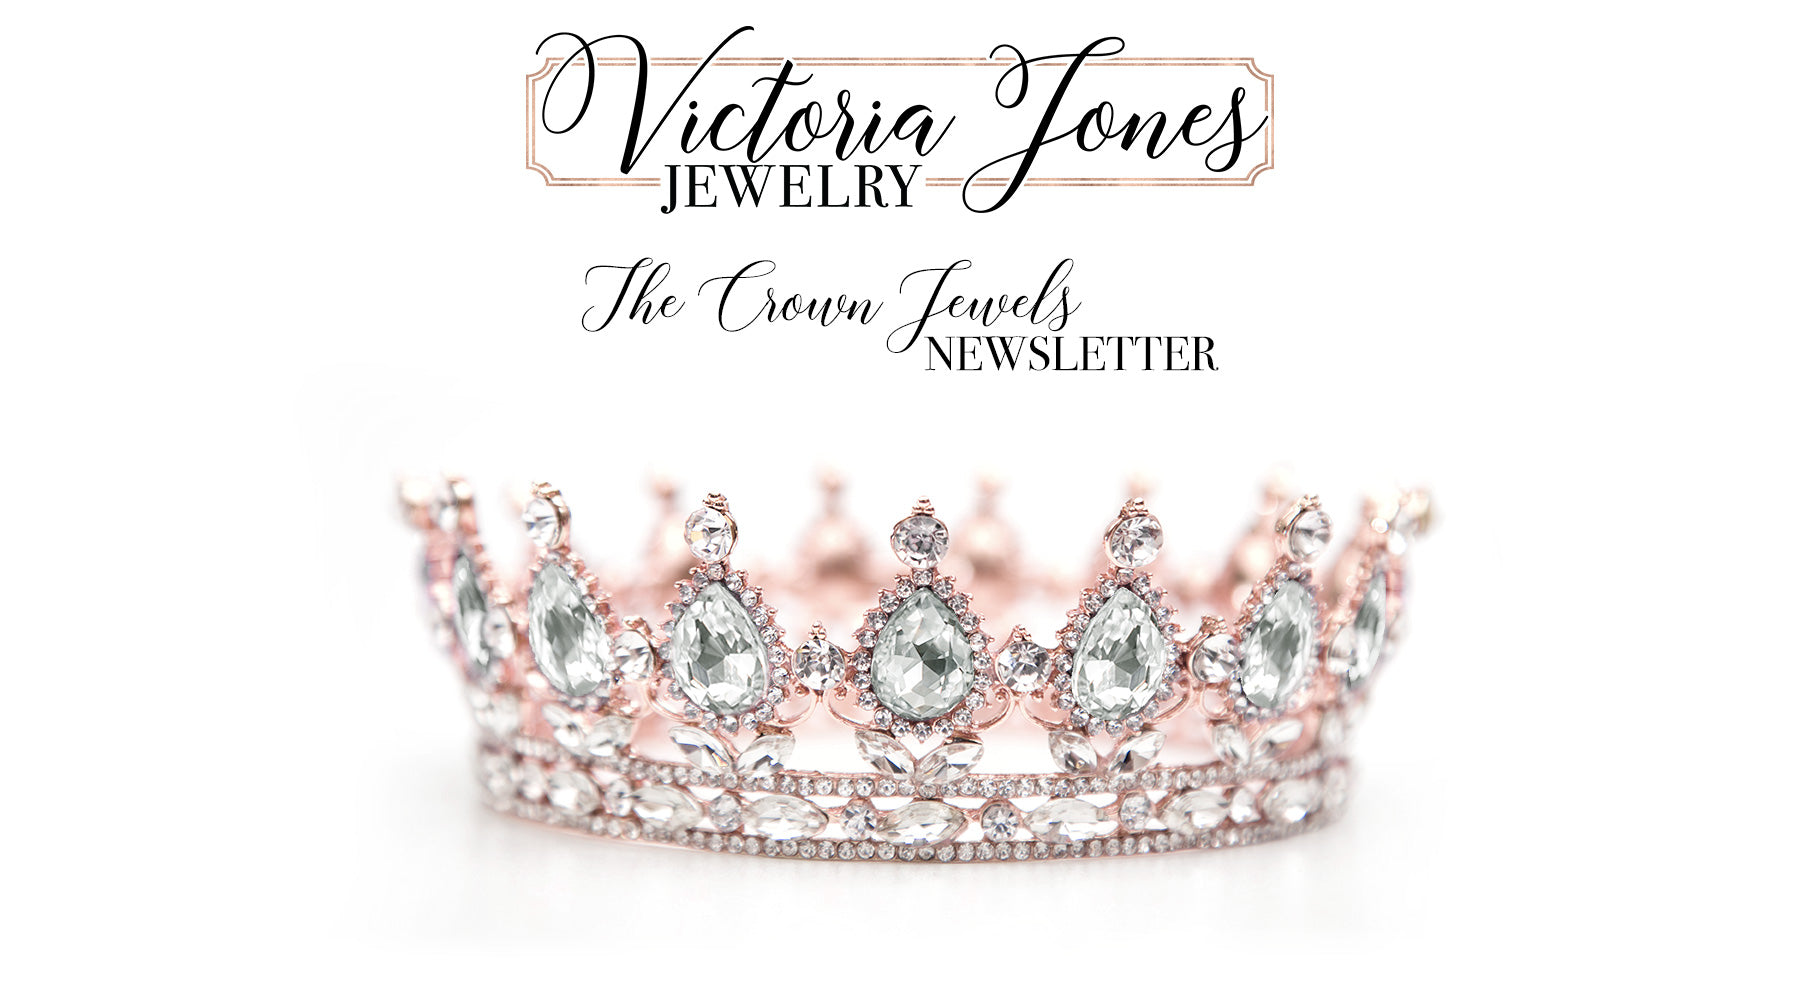 The Crown Jewels Newsletter by Victoria Jones Jewelry